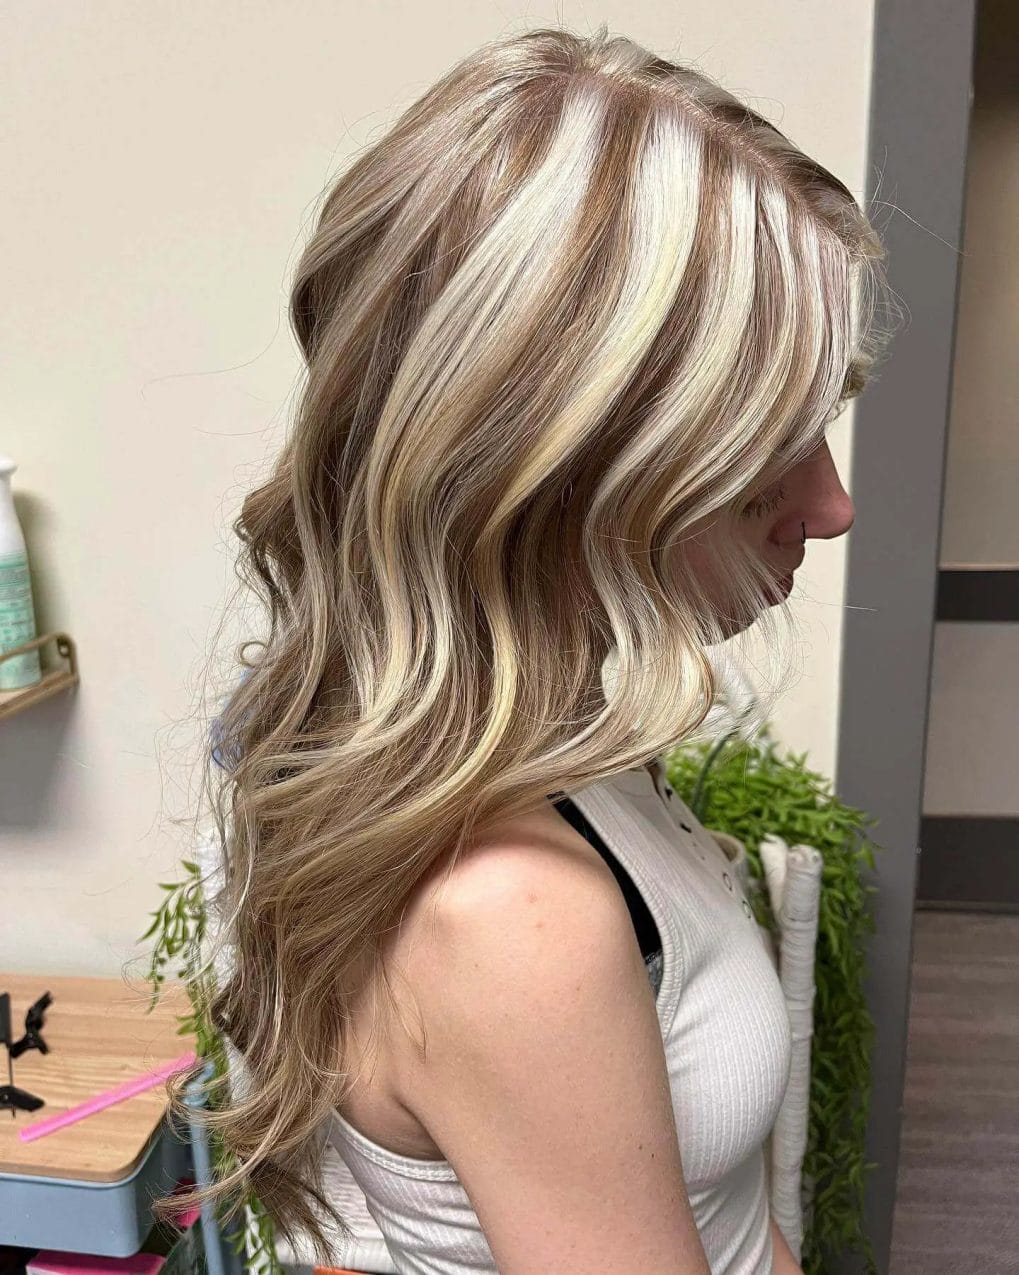 Platinum blonde chunks with sandy base, loose waves, light and beachy look.